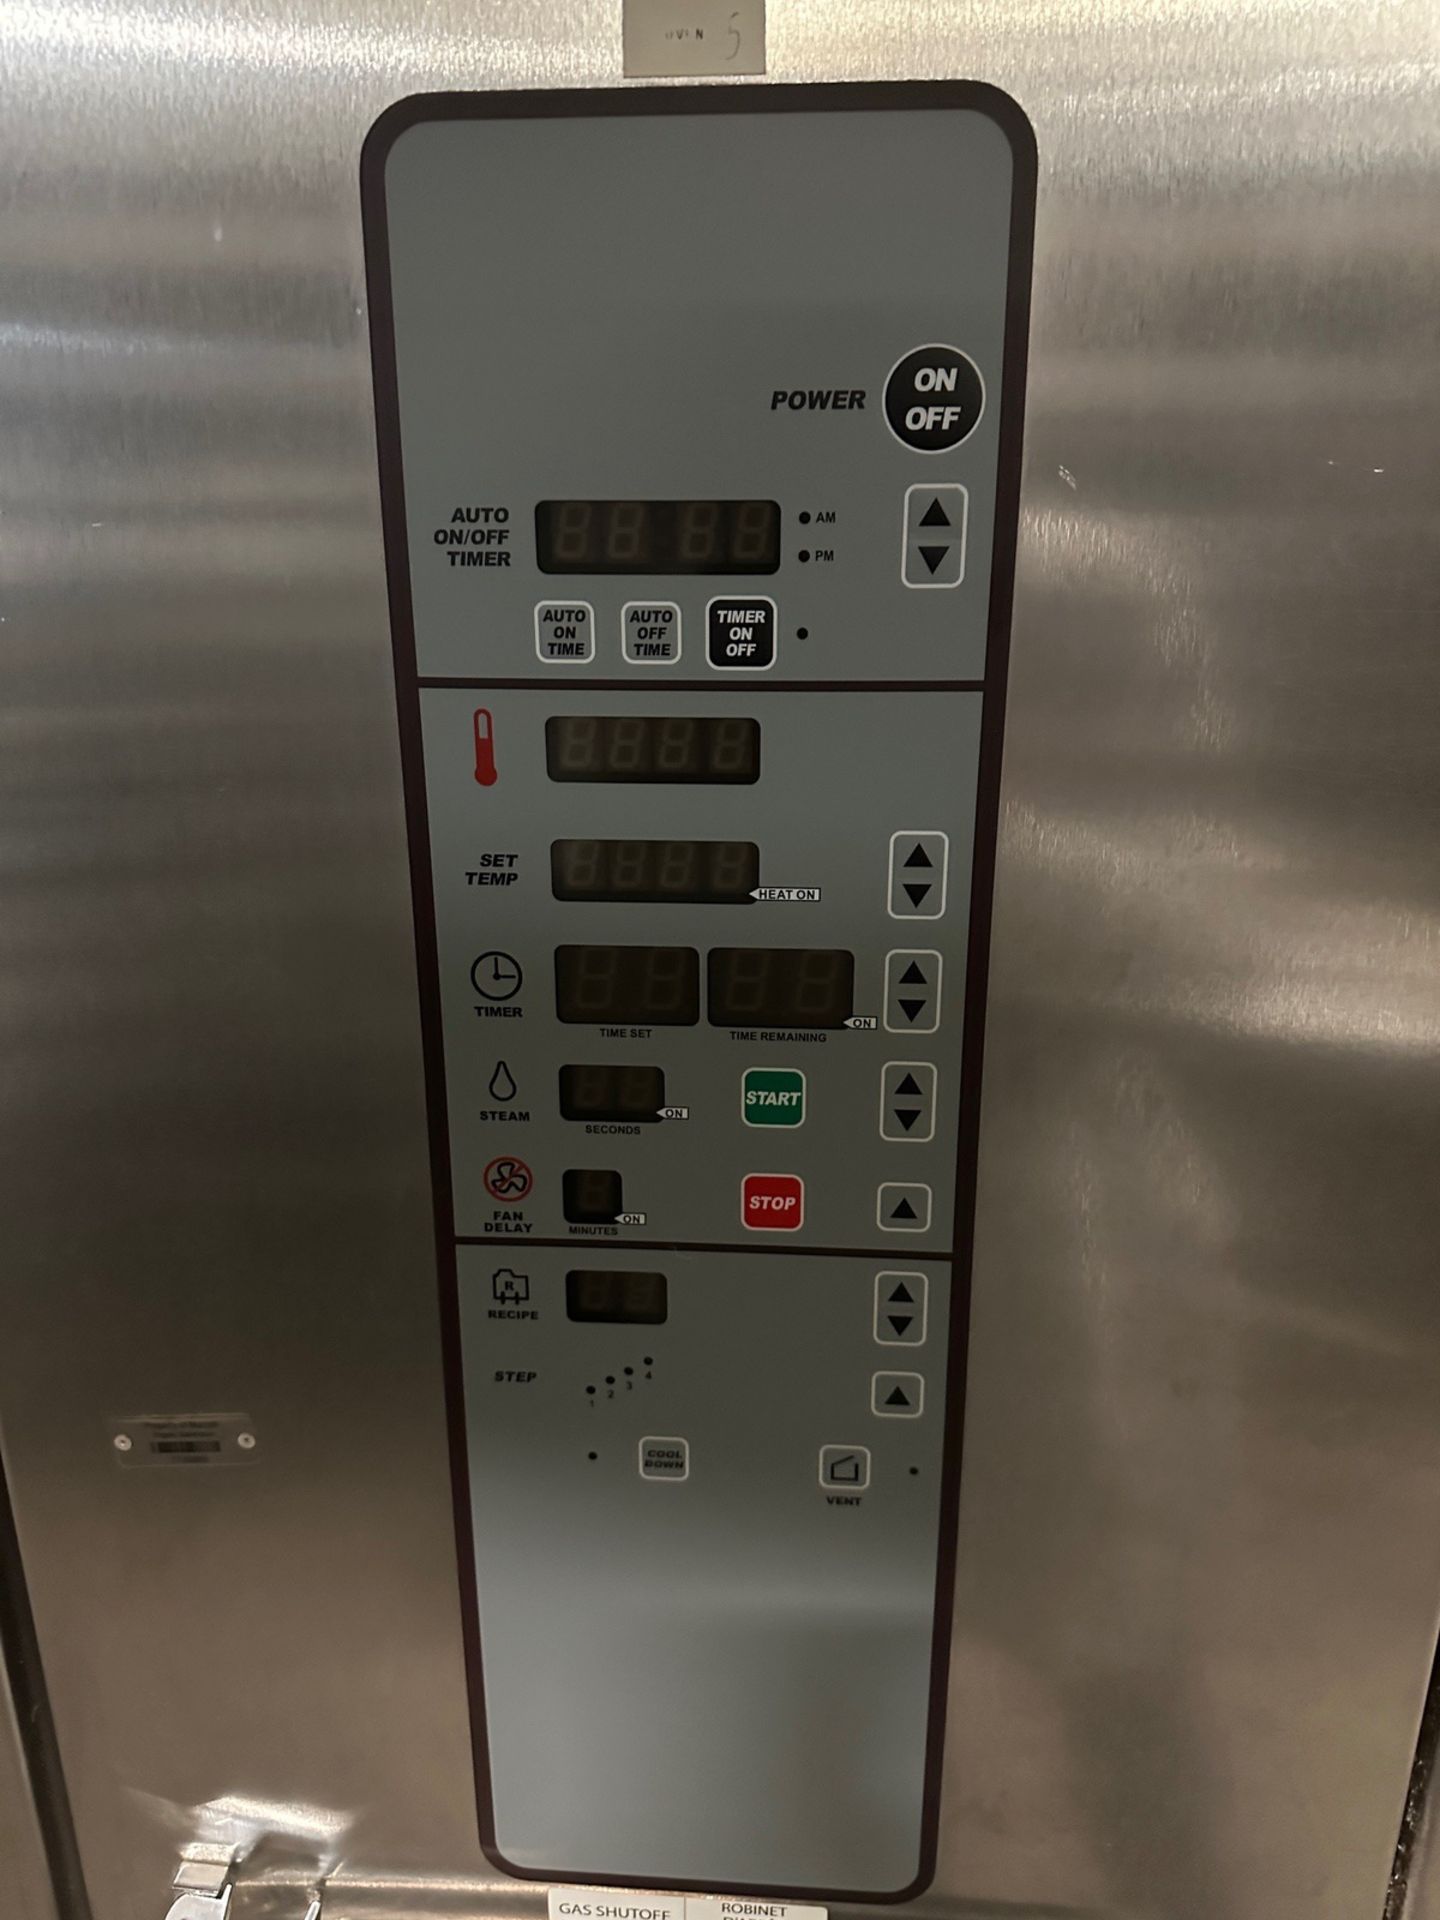 2022 Baxter Rotating Double Rack Oven - Model OV500G2-EE, S/N 24-2040828 | Rig Fee $900 - Image 2 of 4